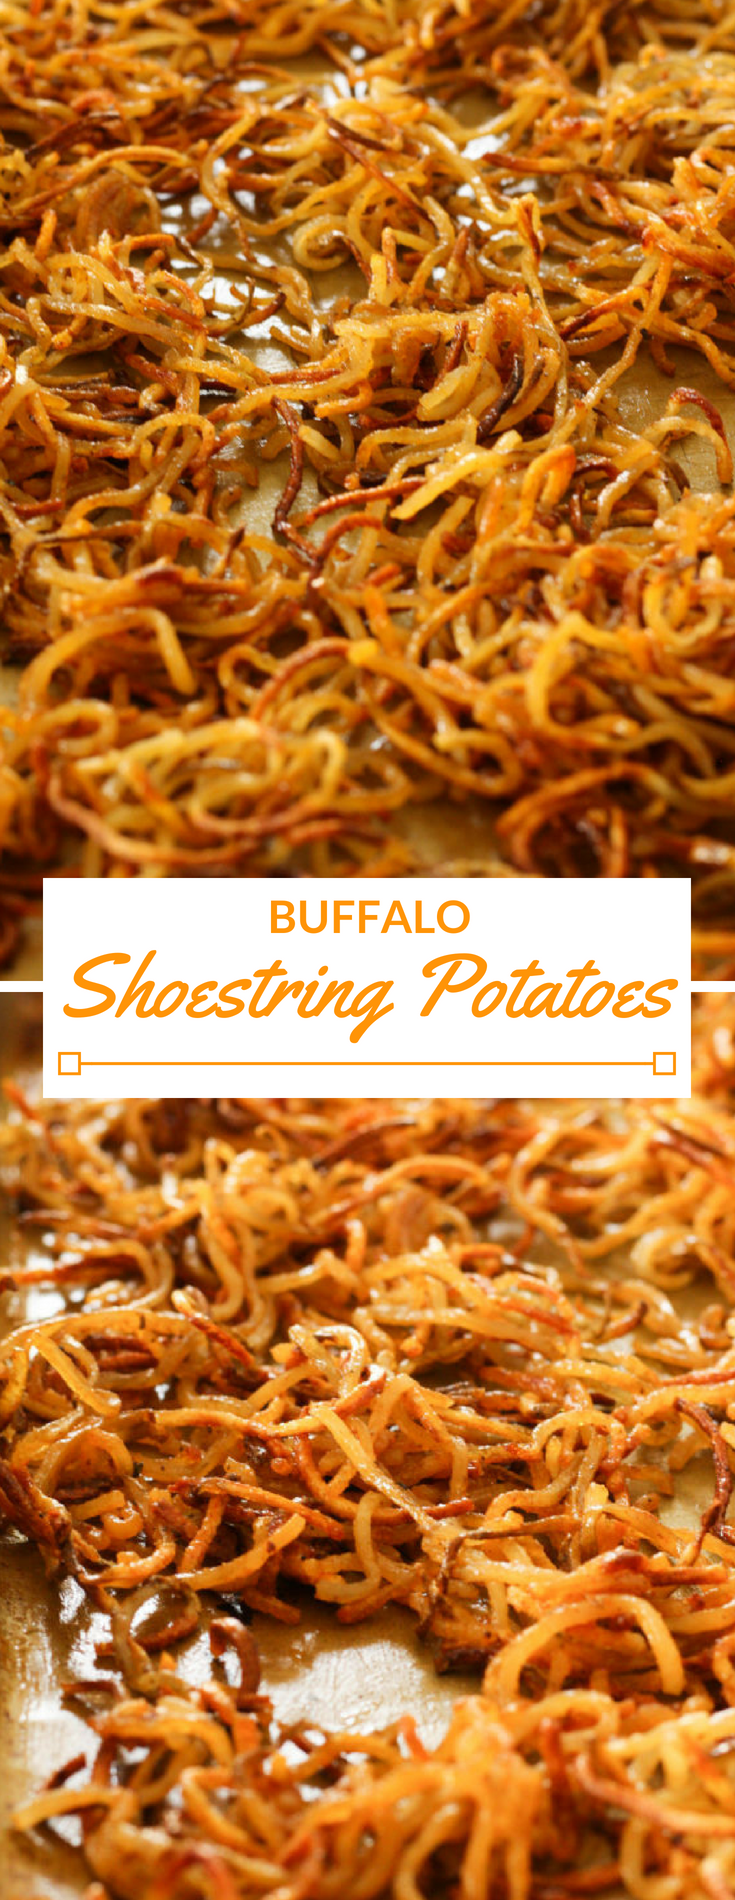 Buffalo shoestring potatoes are the perfect appetizer for your next get together! Spiralized potatoes crisp up quickly in the oven.